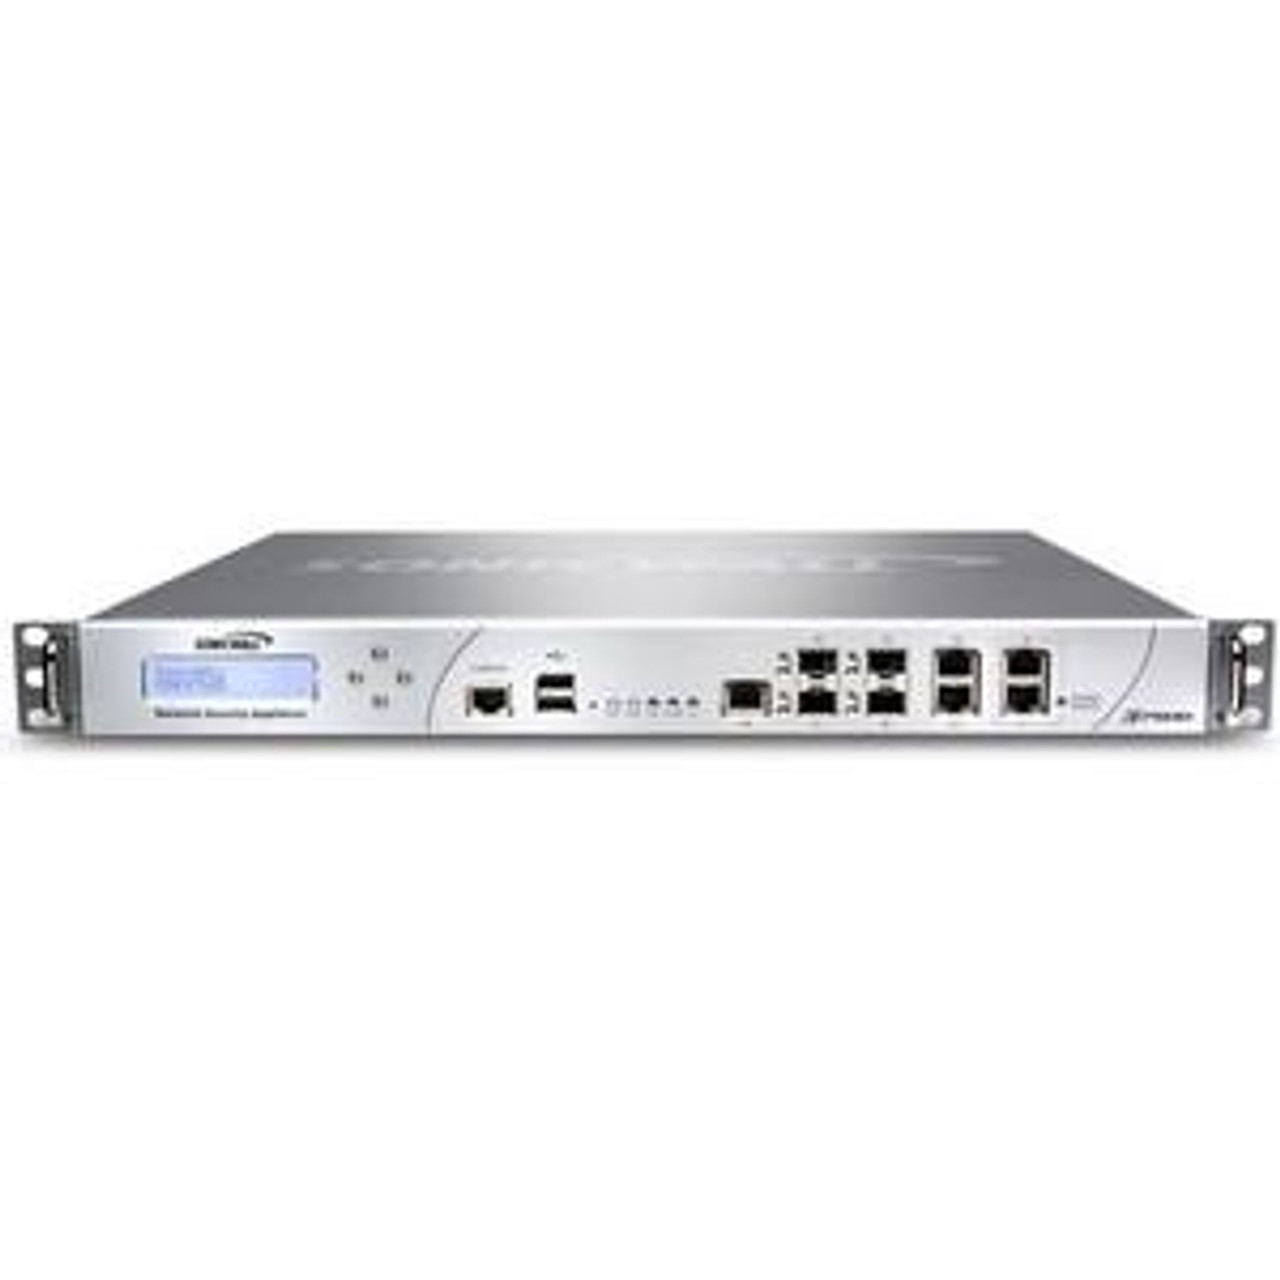 01-SSC-7027 SonicWALL NSA E7500 Unified Threat Management 4 x 10/100/1000Base-T LAN 4 x SFP 2500 User (Refurbished)